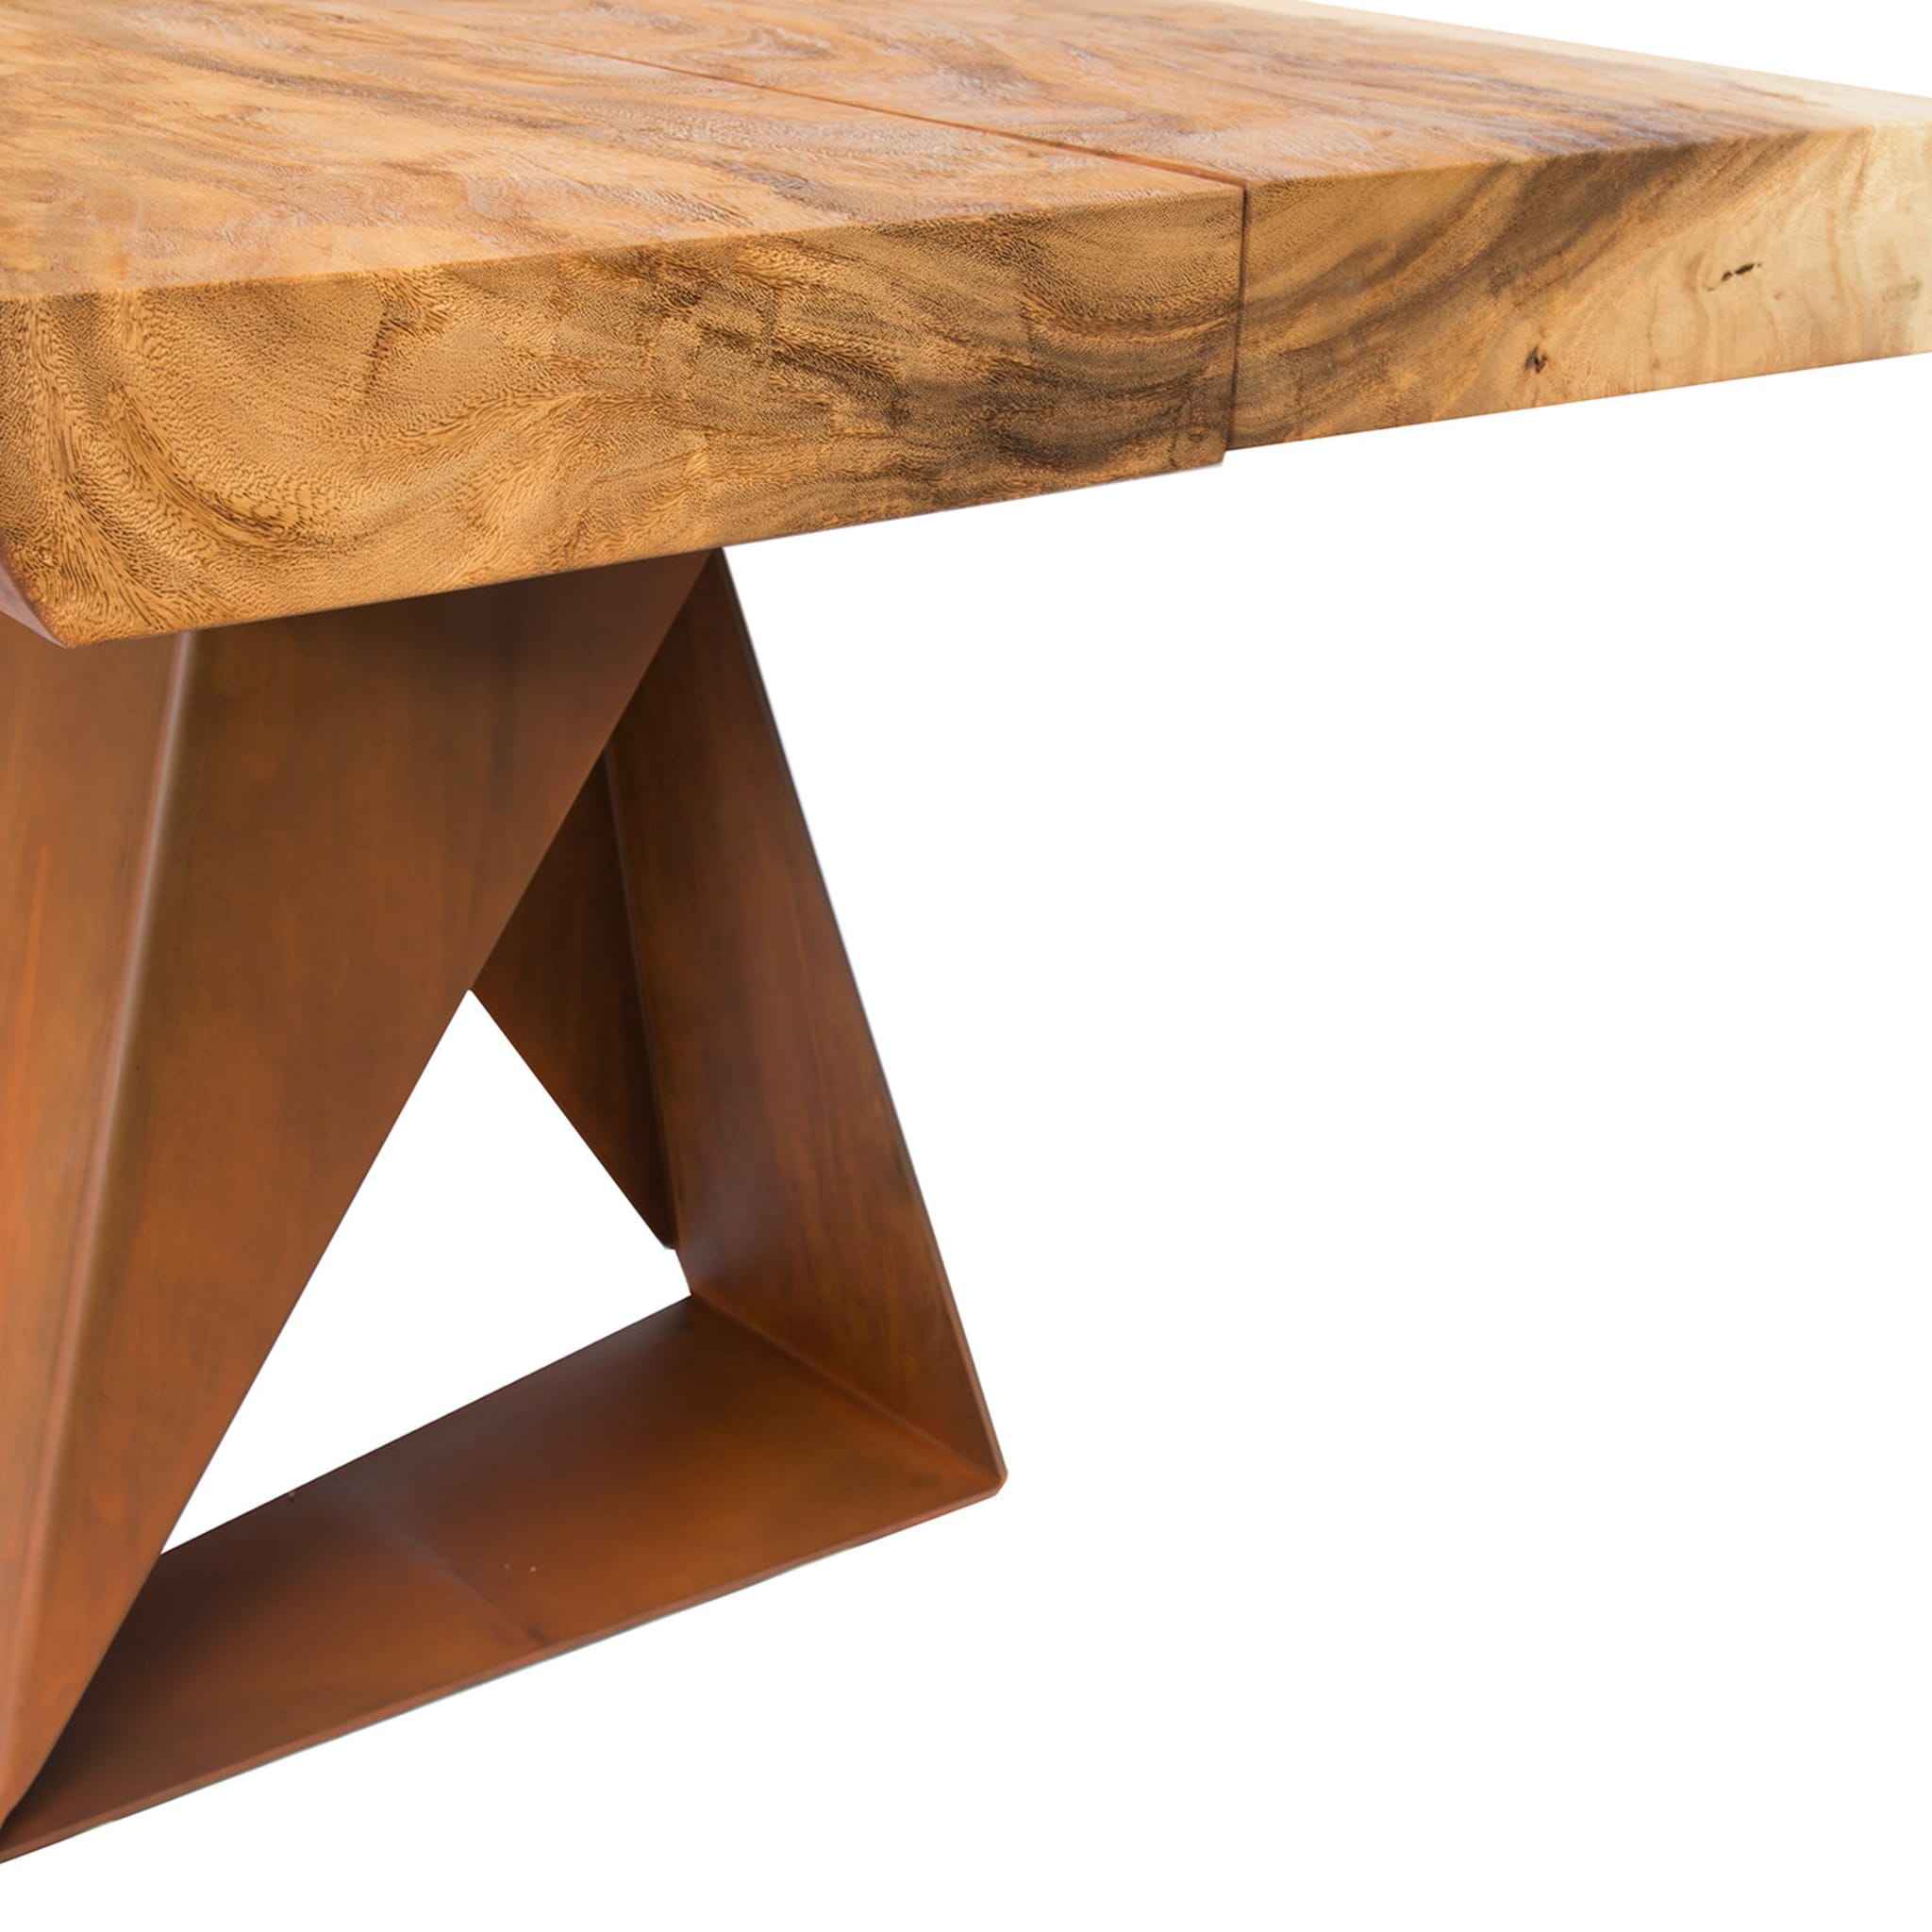 Dasar Dining Table - Alternative view 1